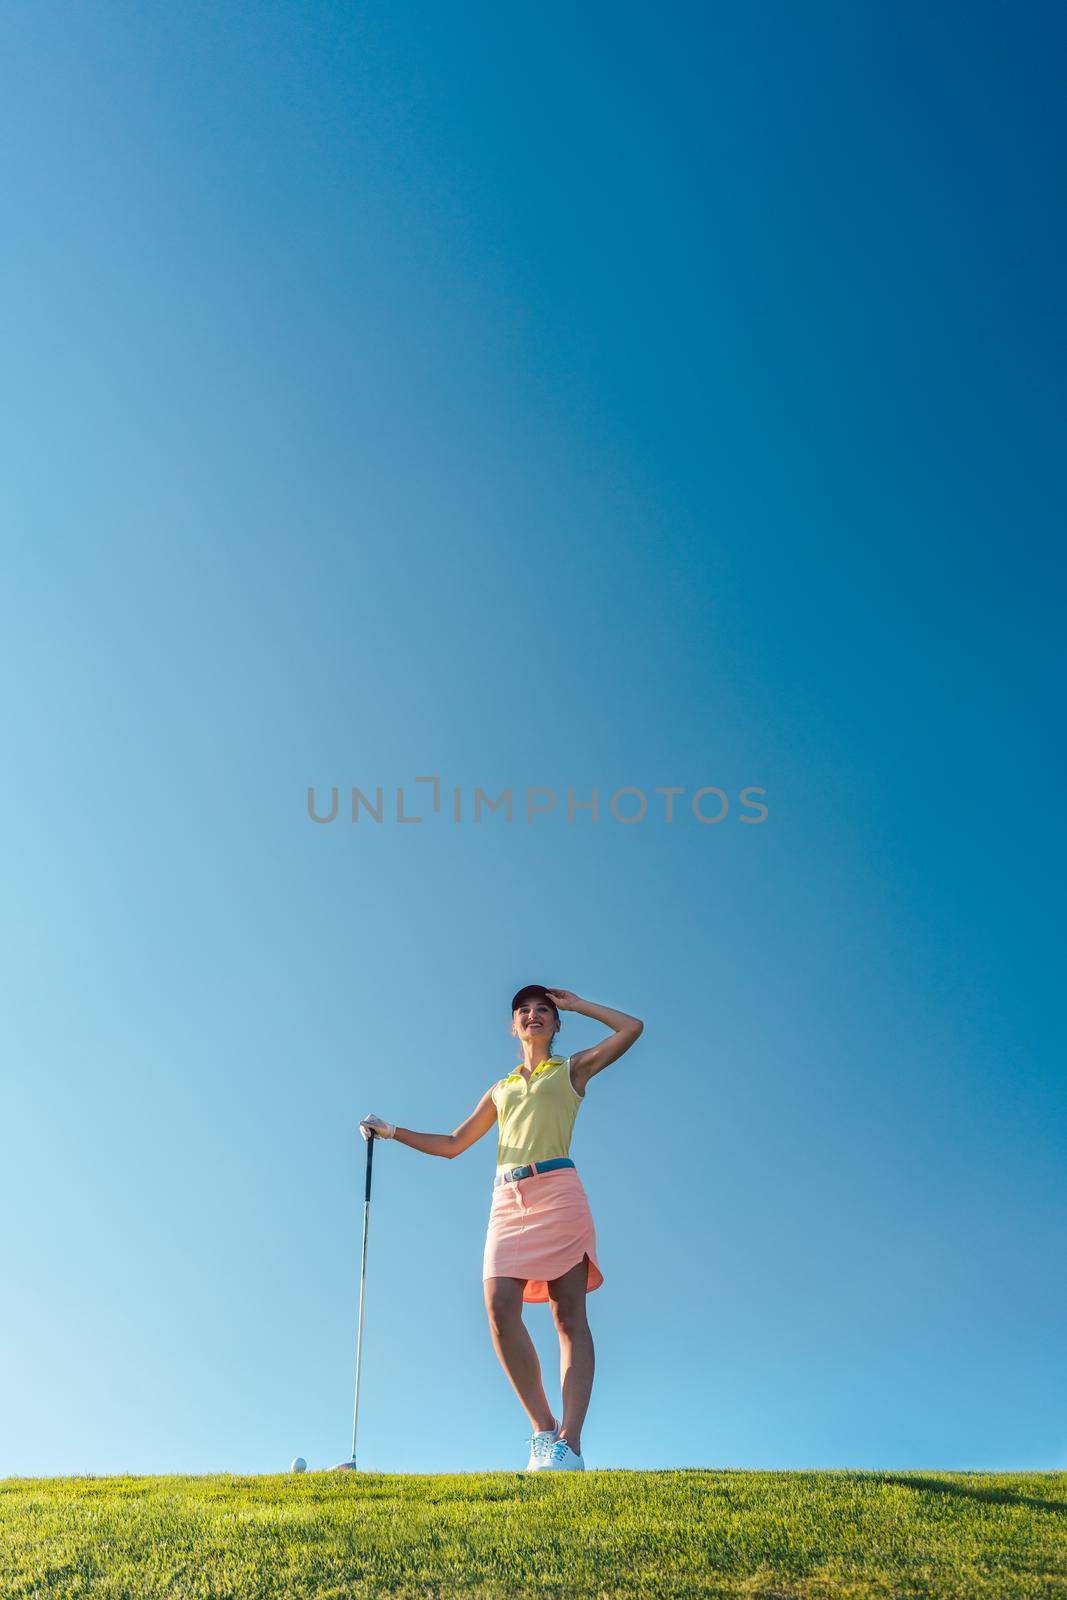 Low-angle view of a fit and cheerful woman wearing golf trendy outfits, while looking away during practice on the green grass of a professional golf course